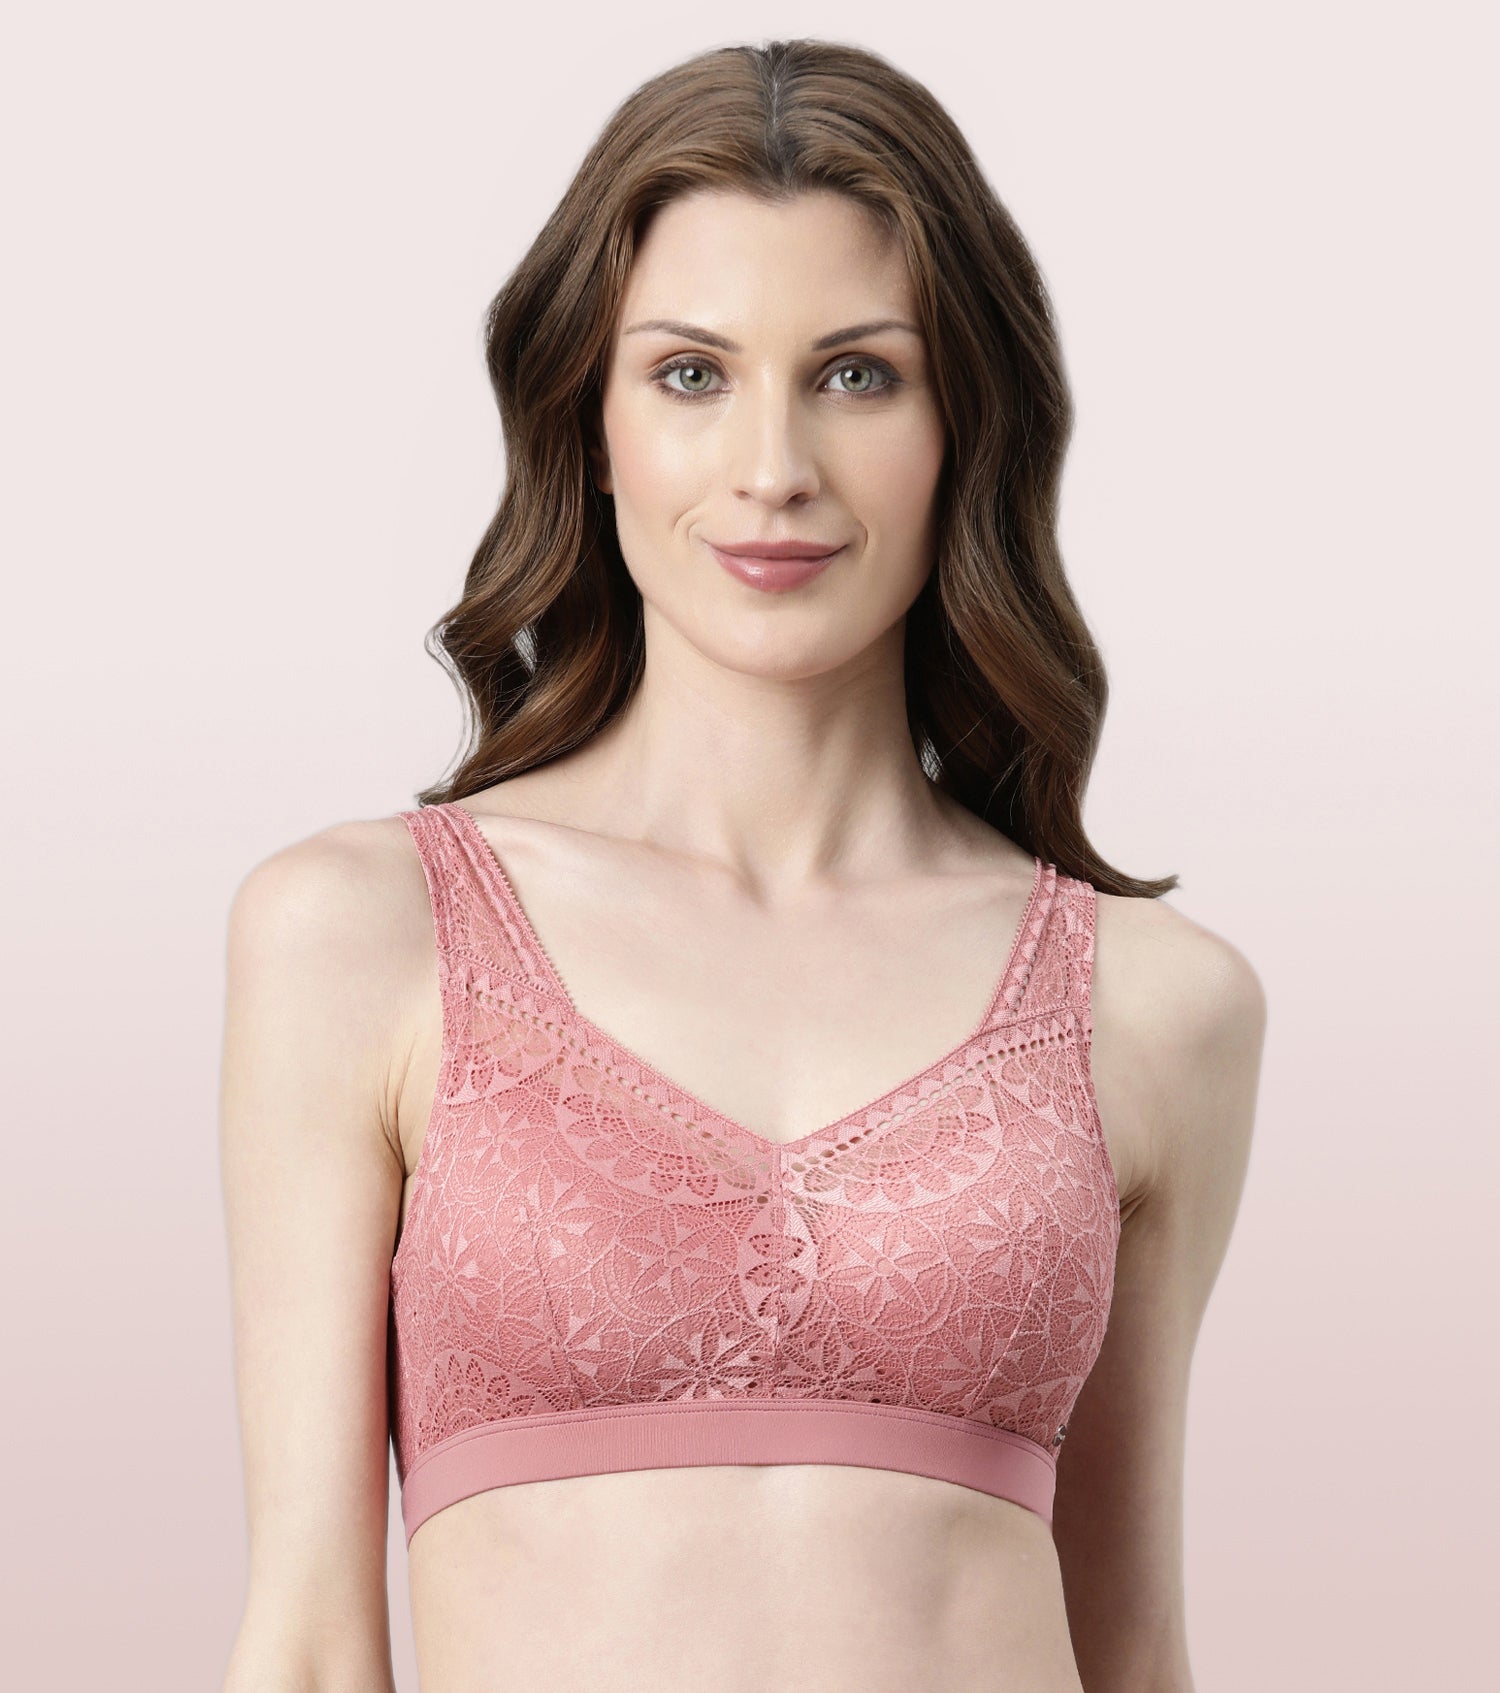 Buy Enamor F122 Smooth Curve Lift Super Support Bra for Women